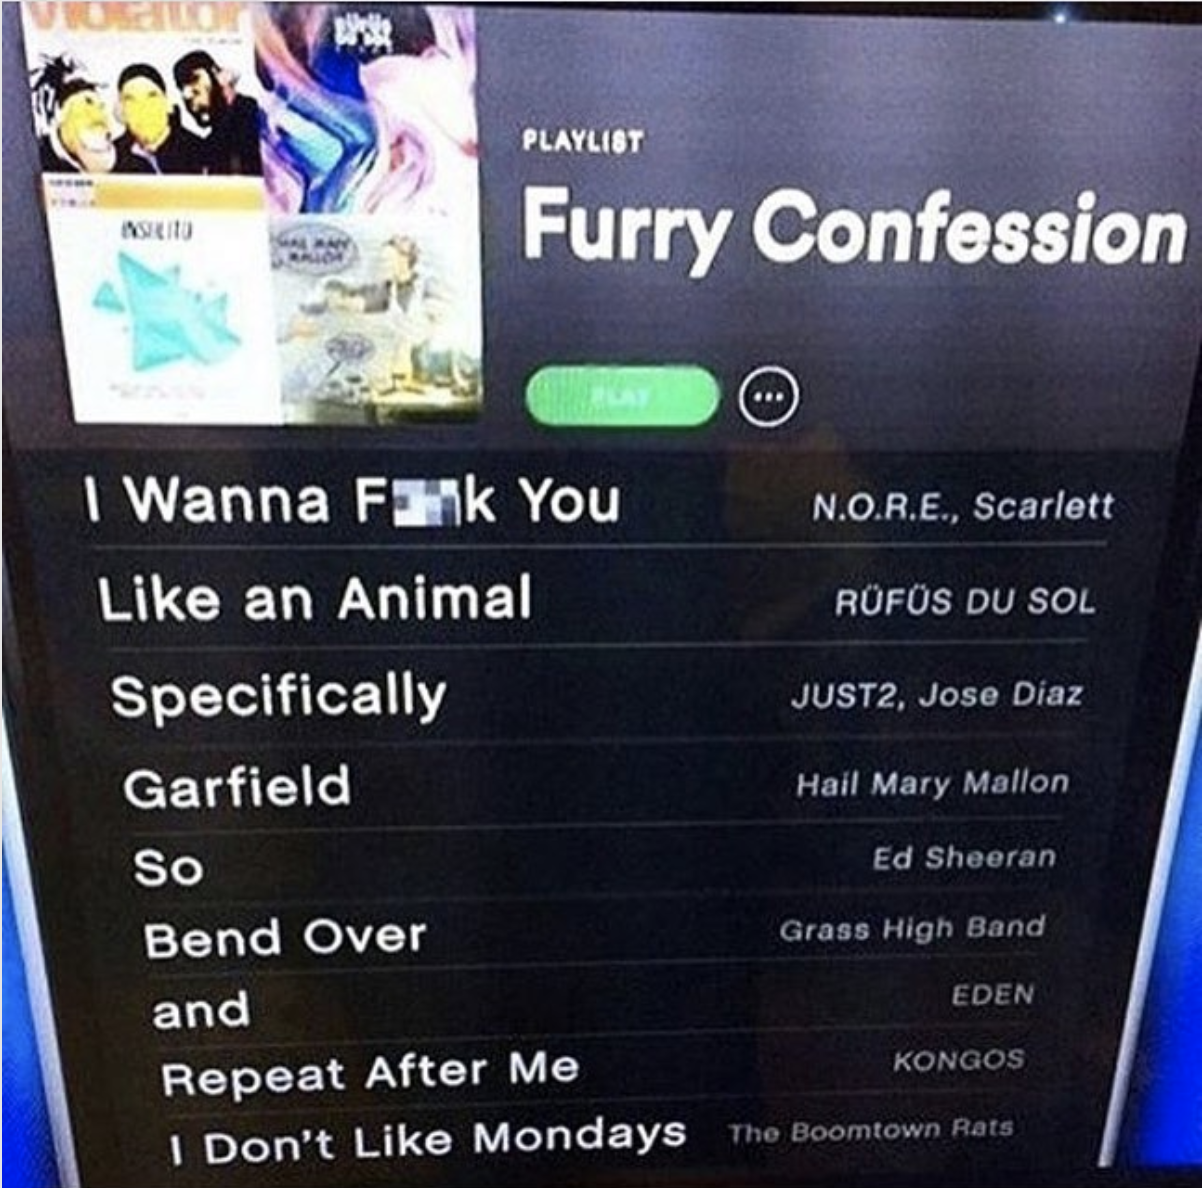 furry confession playlist - Playlist Alu Furry Confession I Wanna Fk You N.O.R.E., Scarlett an Animal Rfs Du Sol Specifically JUST2, Jose Diaz Garfield Hail Mary Mallon So Ed Sheeran Bend Over Grass High Band and Eden Repeat After Me Kongos I Don't Monday